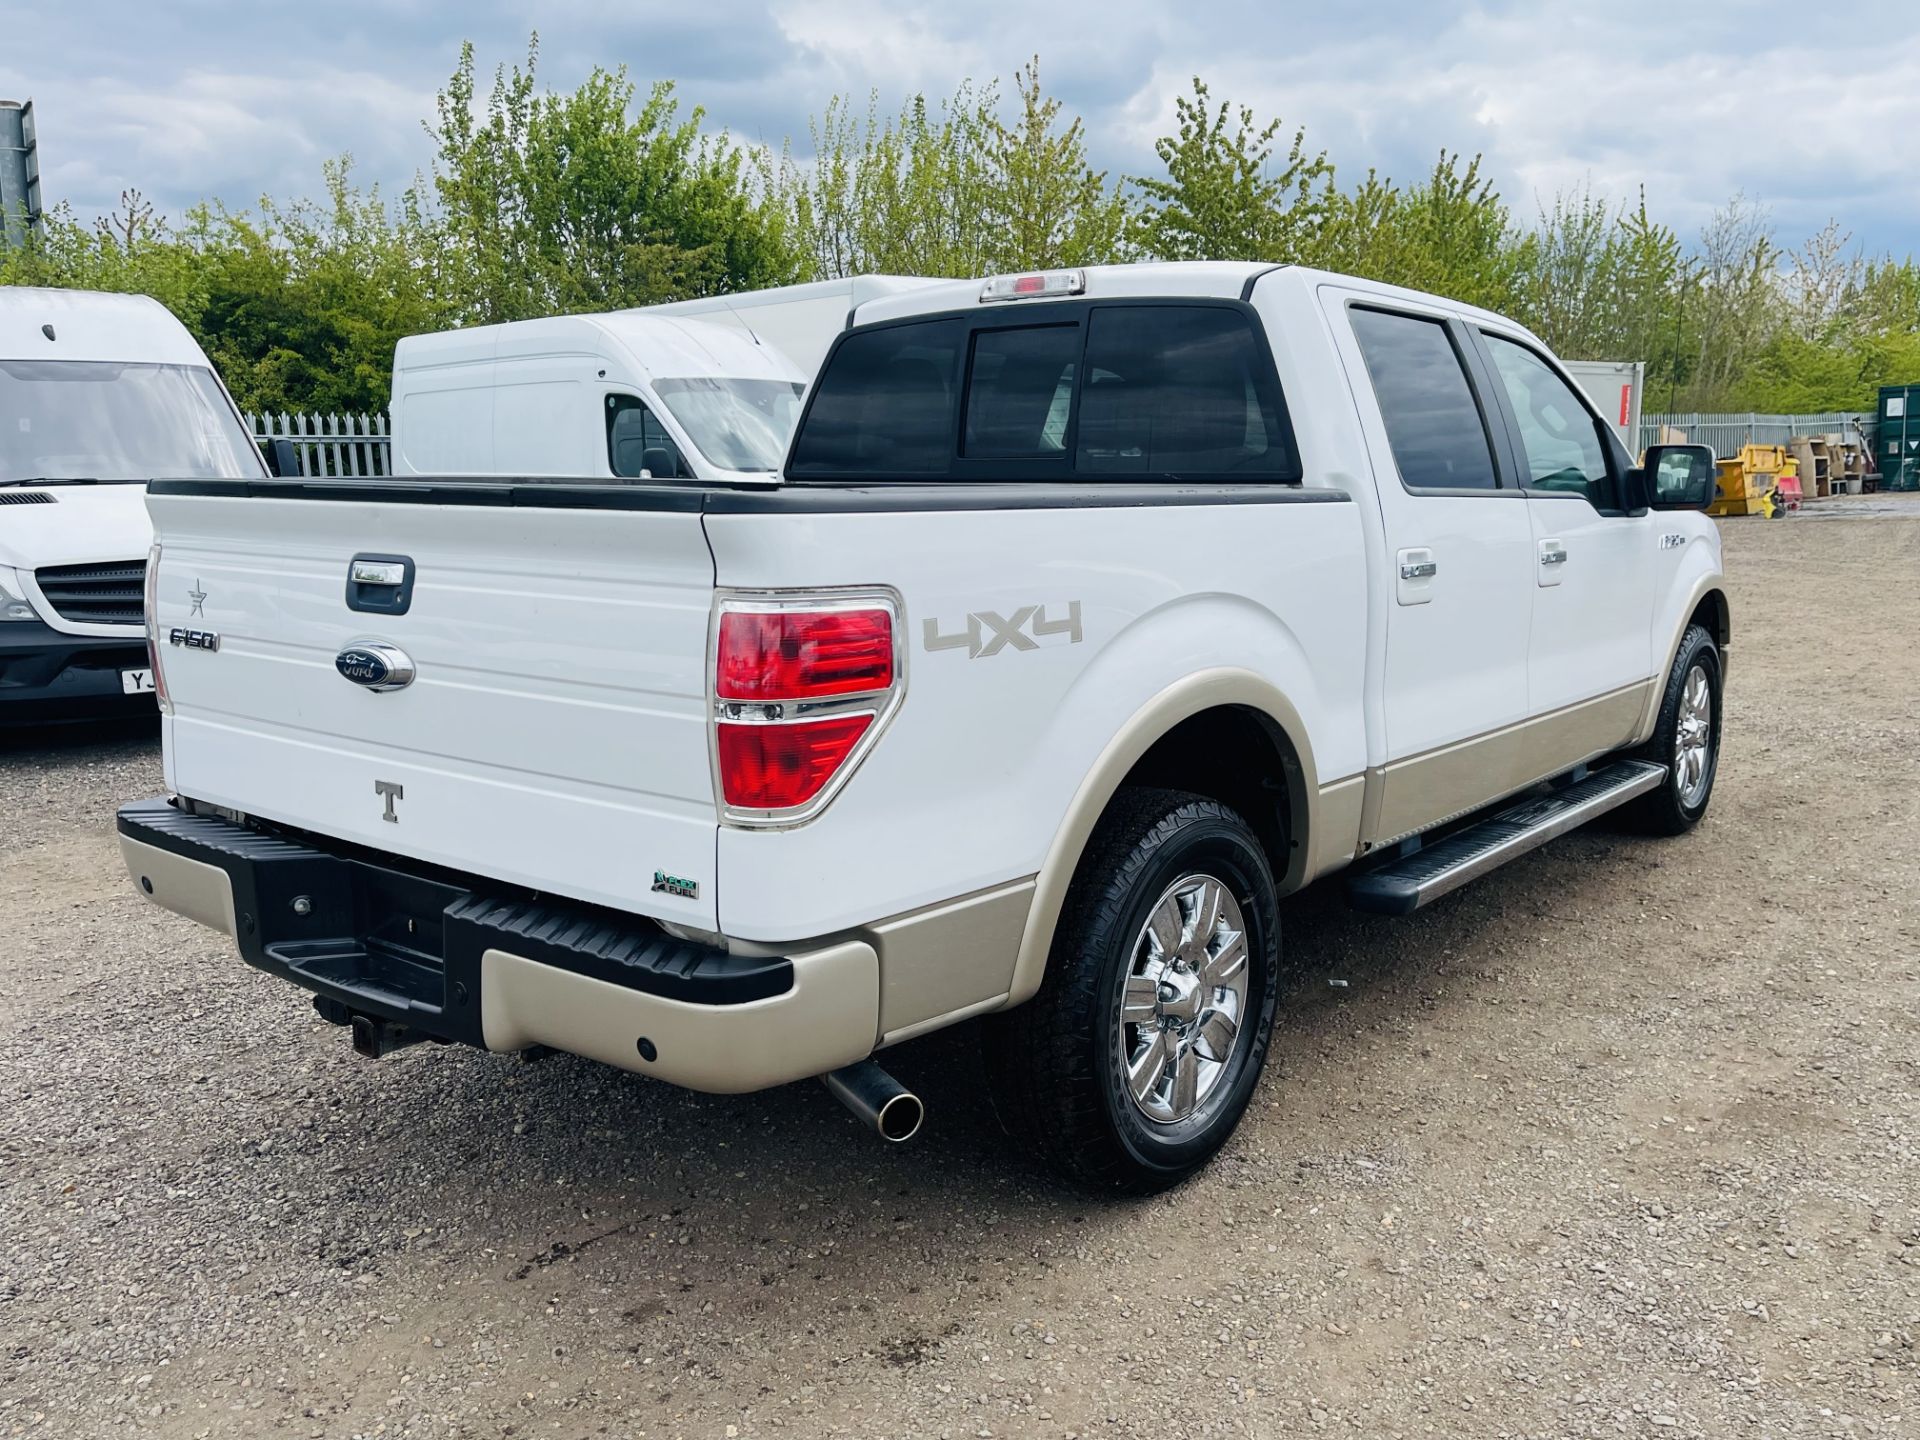 ** ON SALE ** Ford F-150 5.4L V8 Lariat Supercrew 4WD ' 2010 Year' A/C - Full Spec - ULEZ Compliant - Image 11 of 29